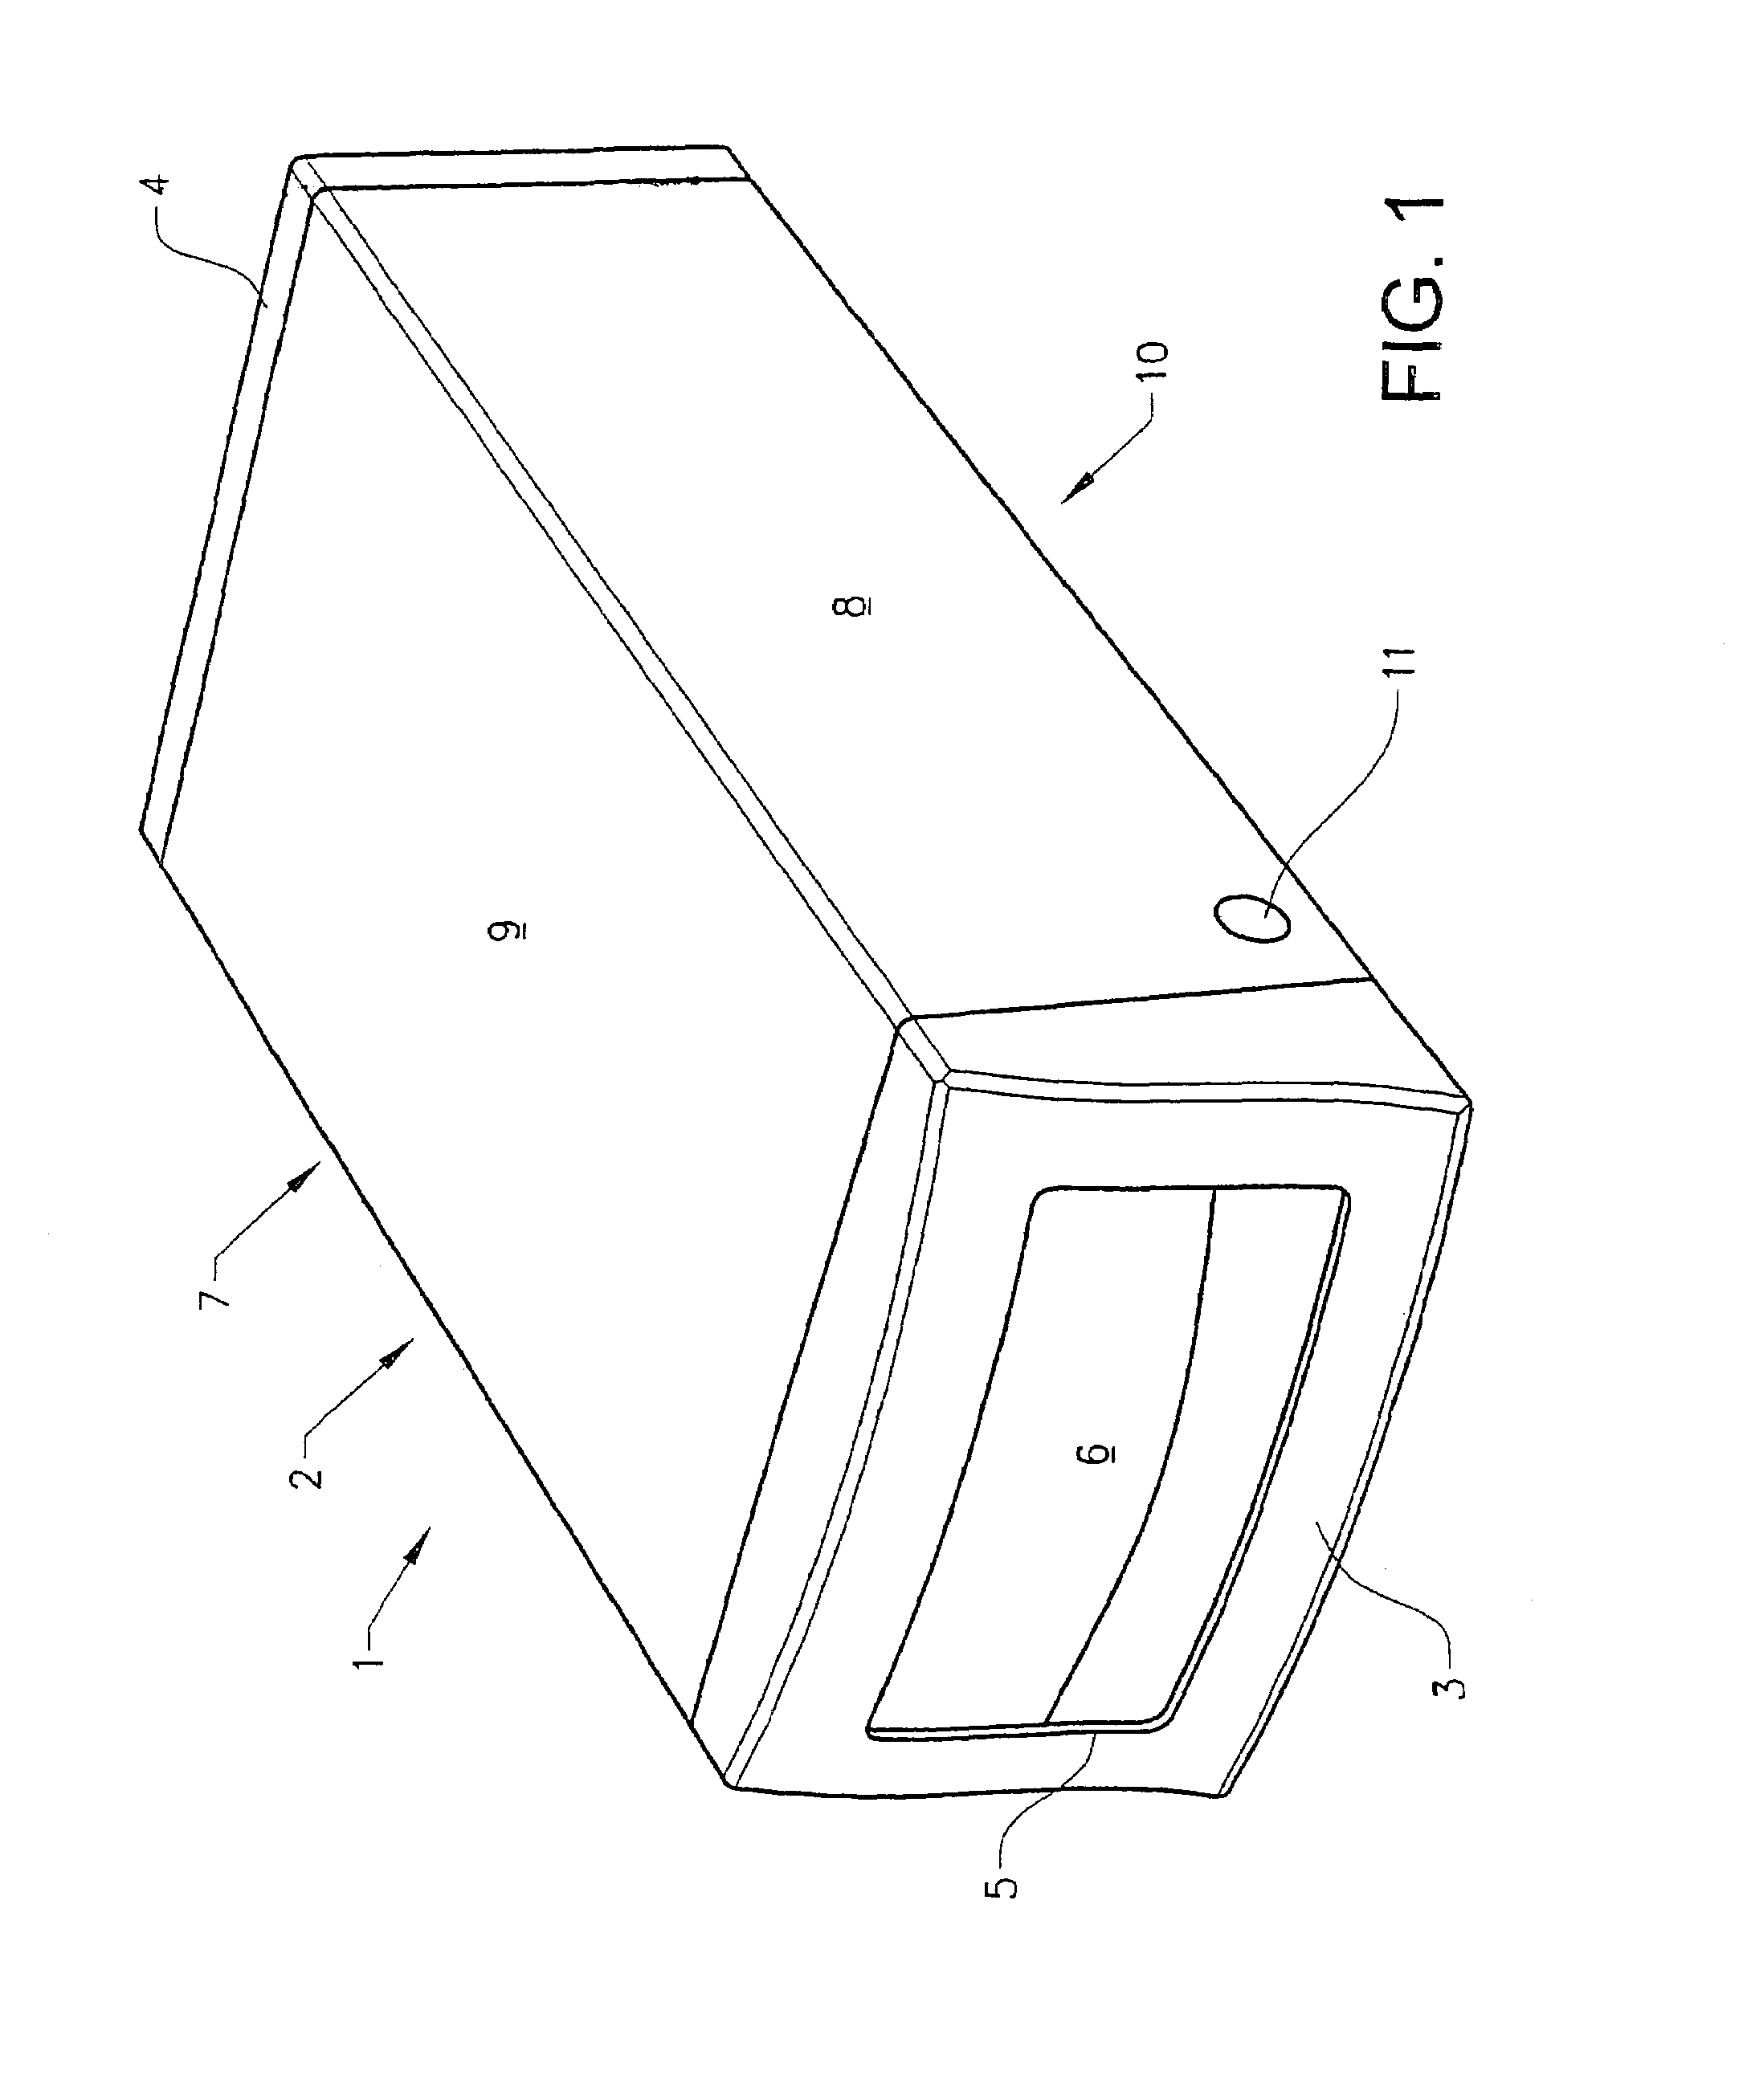 Apparatus for serially dispensing folder sheet products